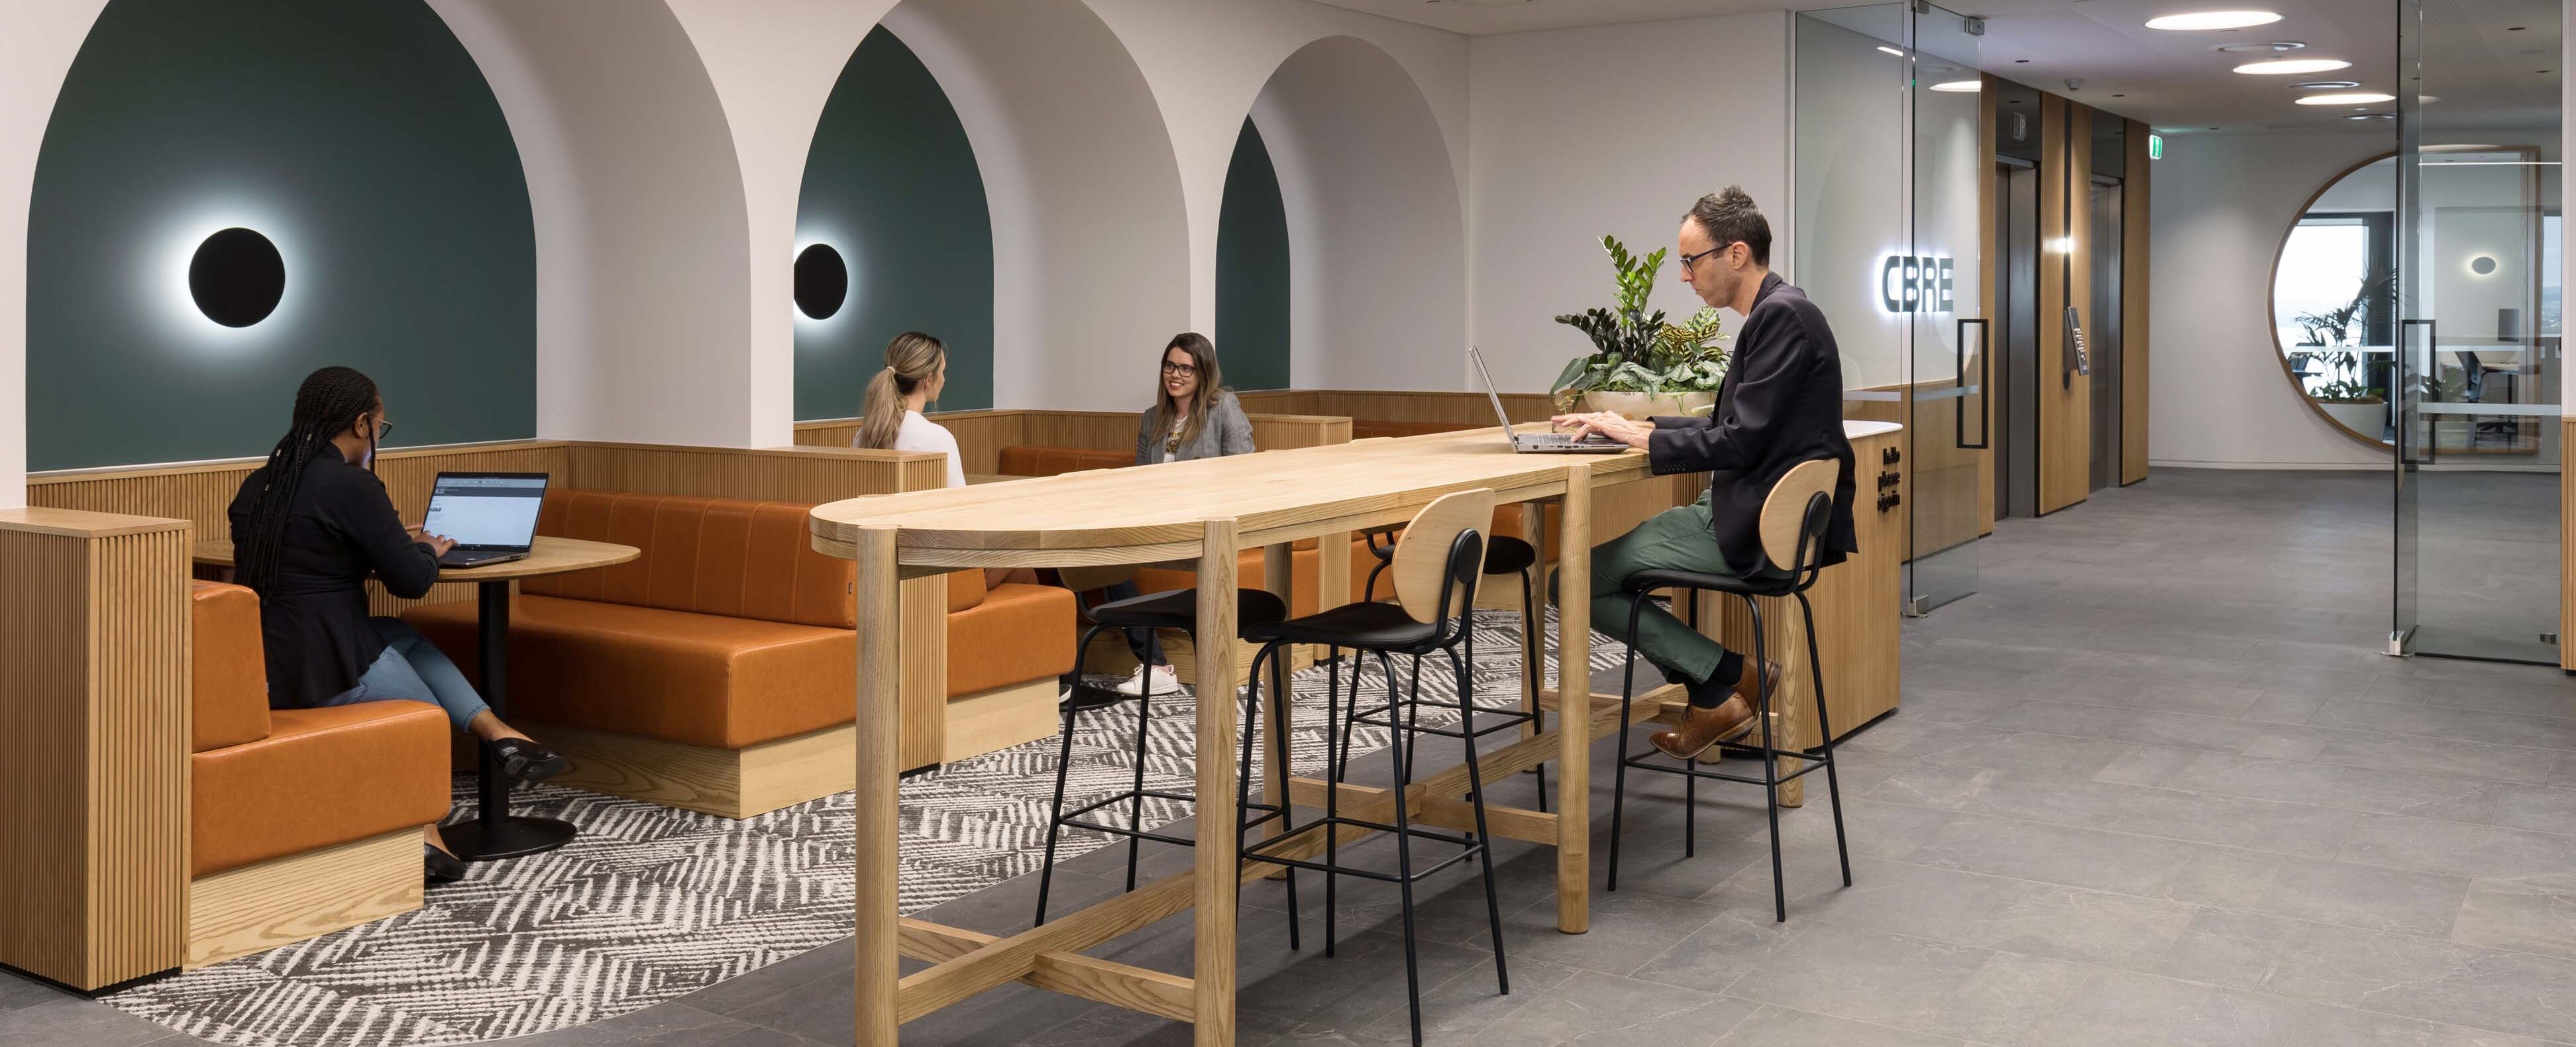 Solace banquettes and bespoke solid timber leaners to create comfortable breakout spaces at CBRE Auckland 